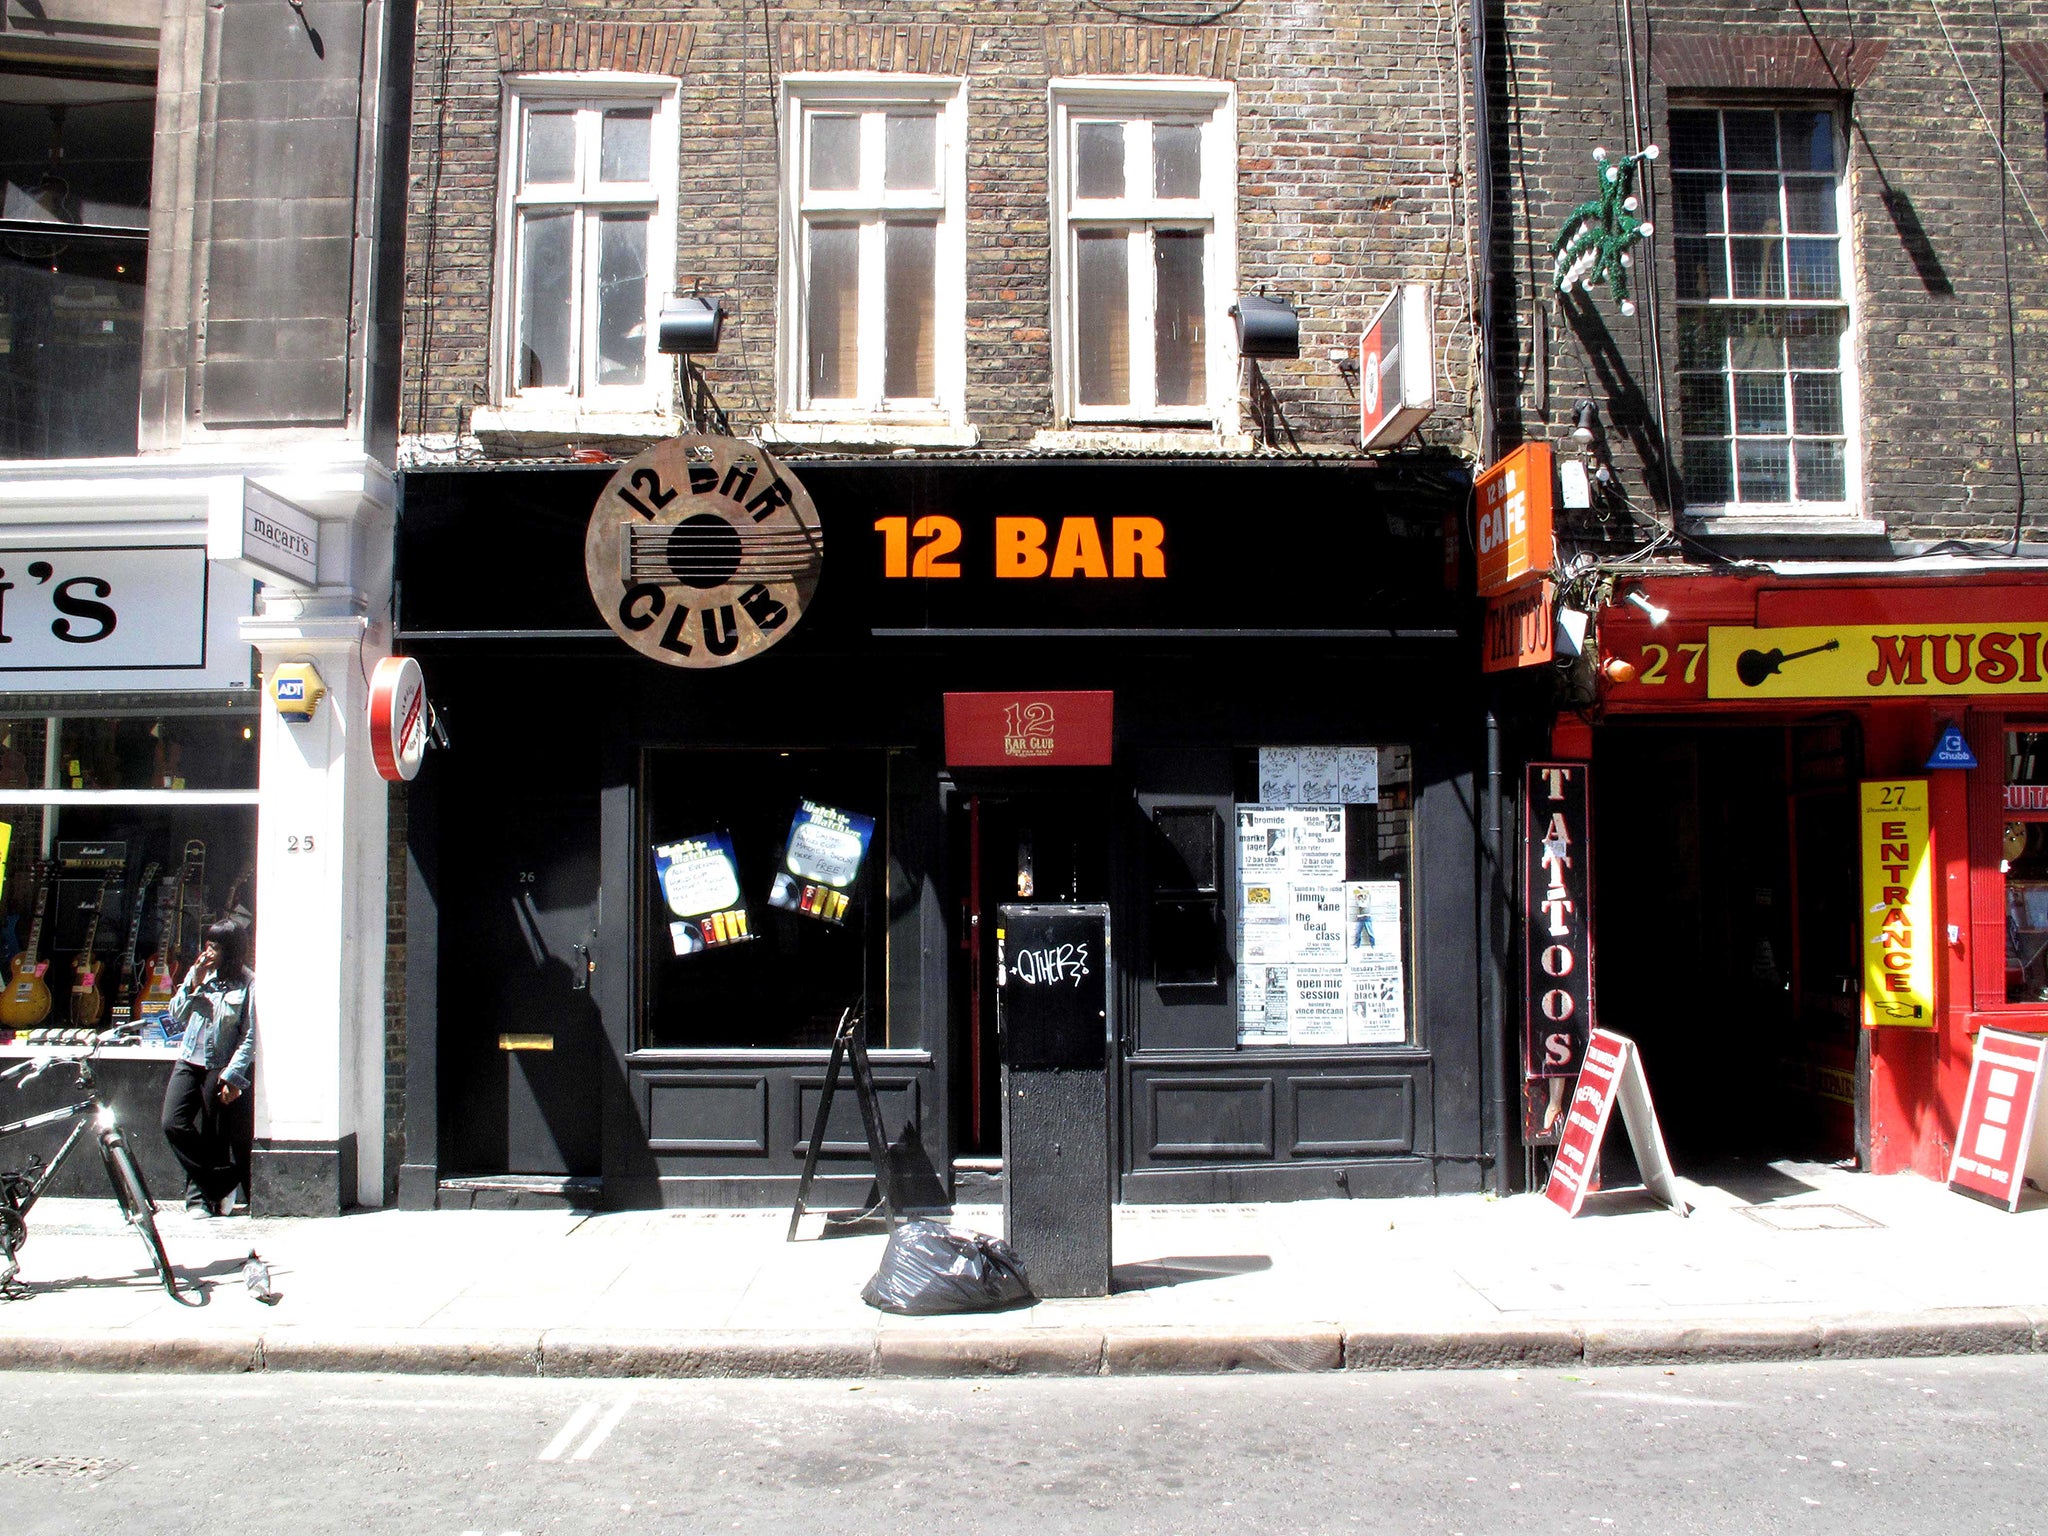 The 12 Bar Club on London’s “Tin Pan Alley” was forced to relocate because of redevelopment